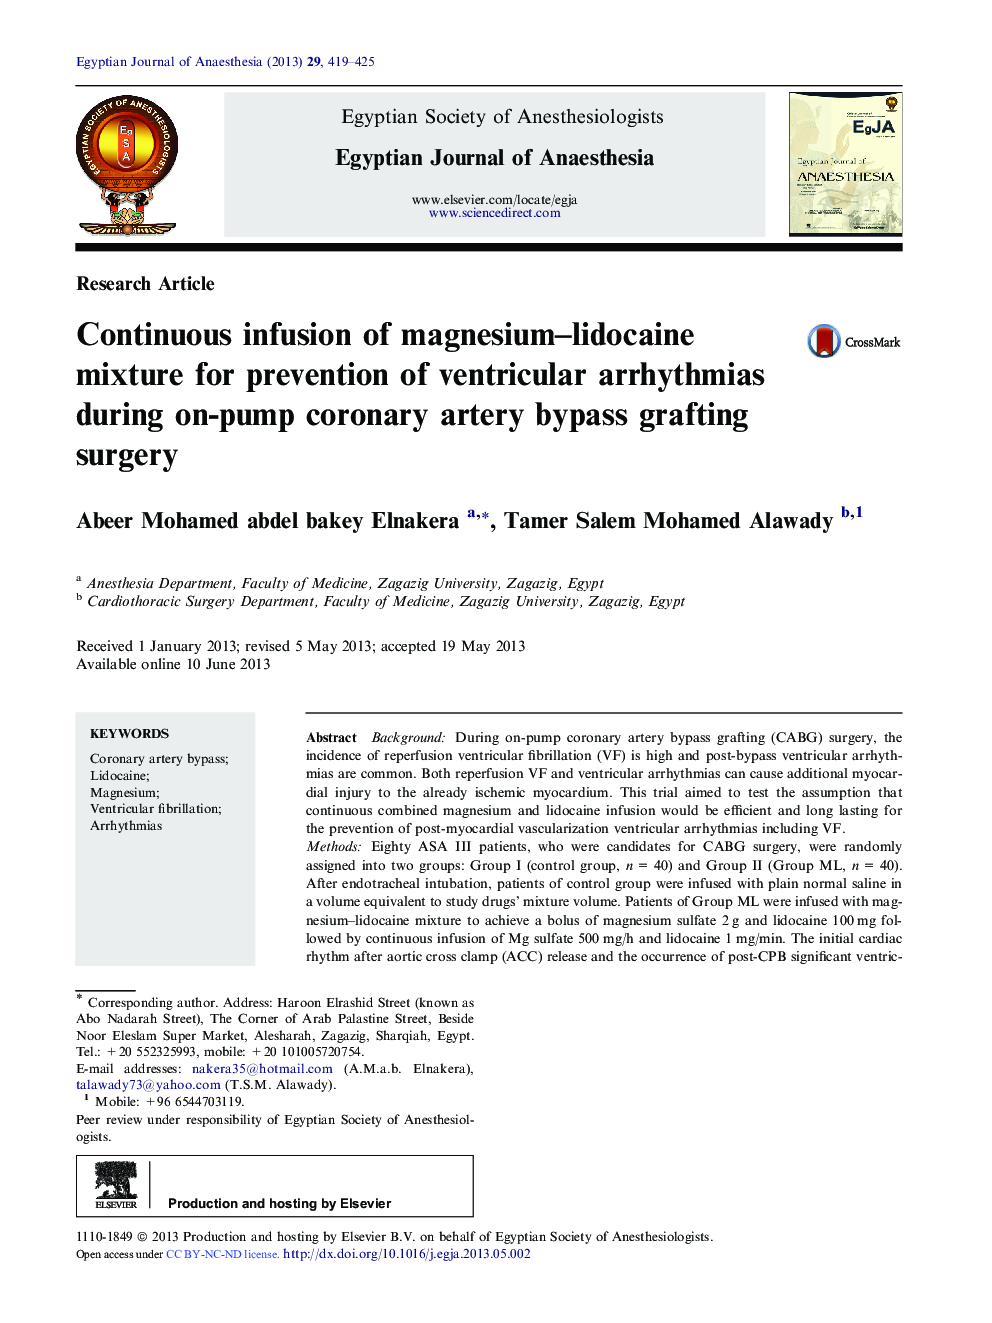 Continuous infusion of magnesium–lidocaine mixture for prevention of ventricular arrhythmias during on-pump coronary artery bypass grafting surgery 